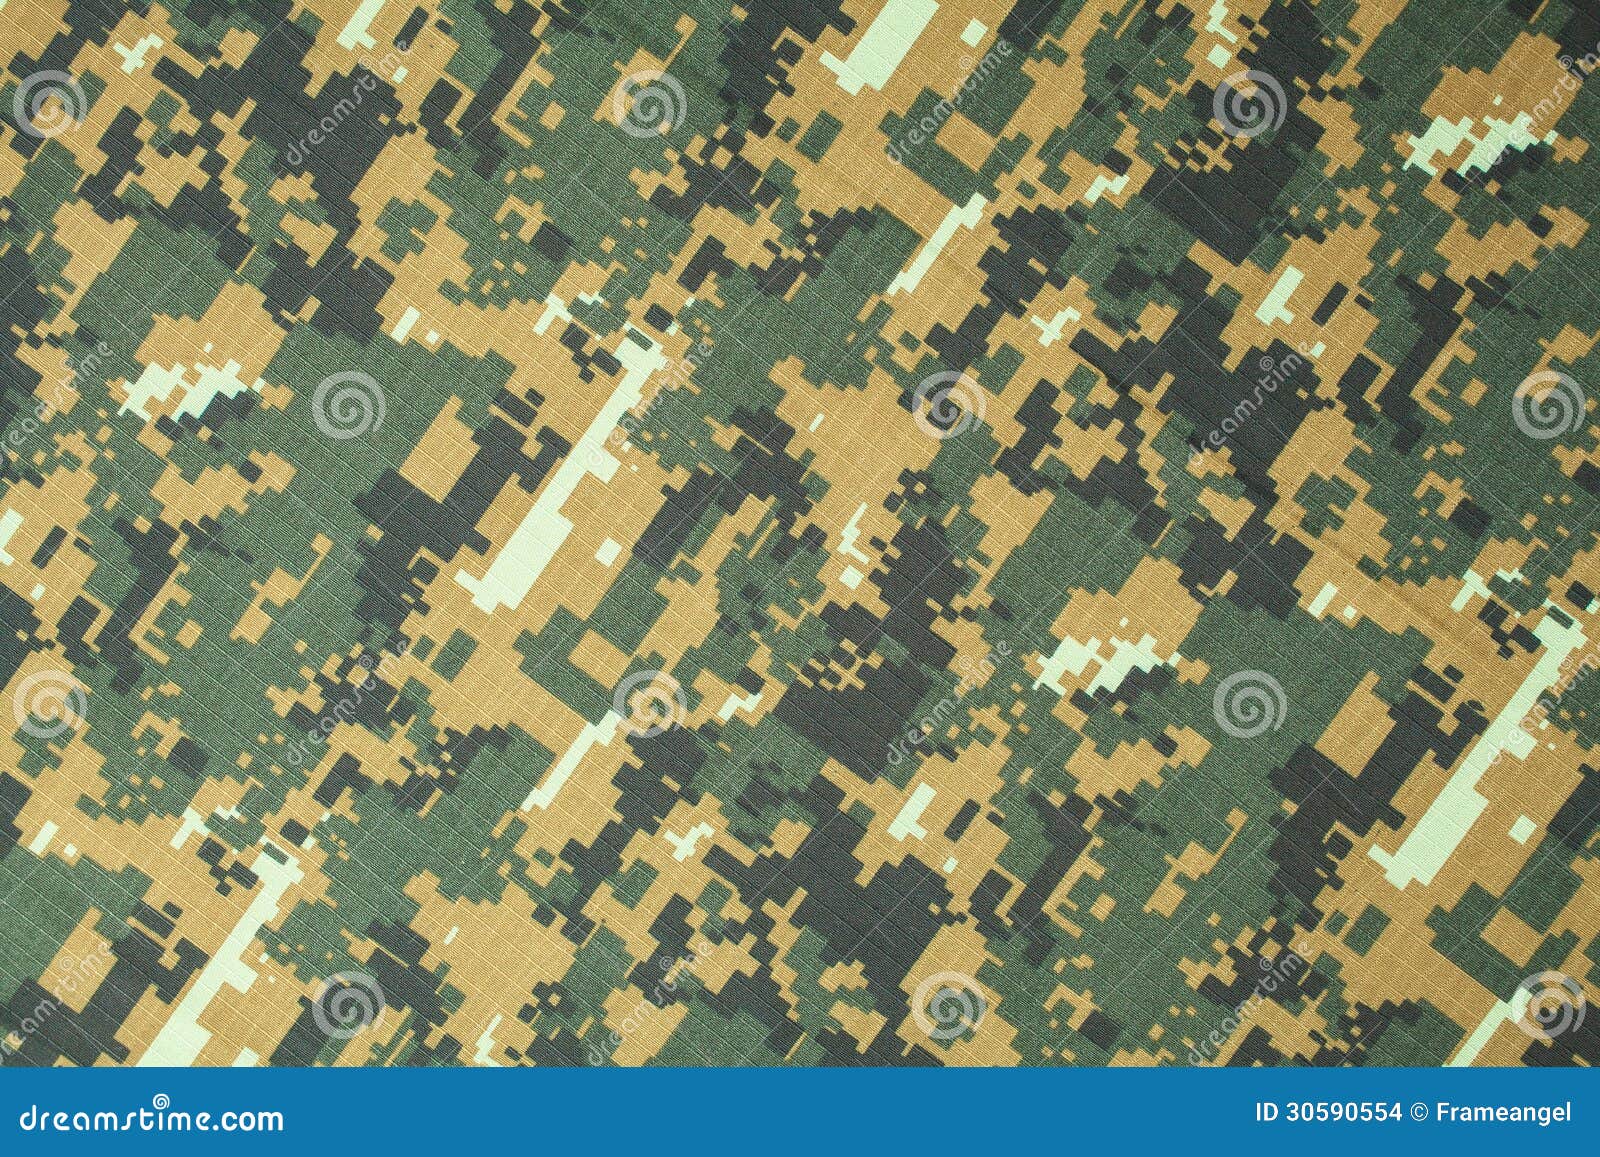 military texture camouflage background